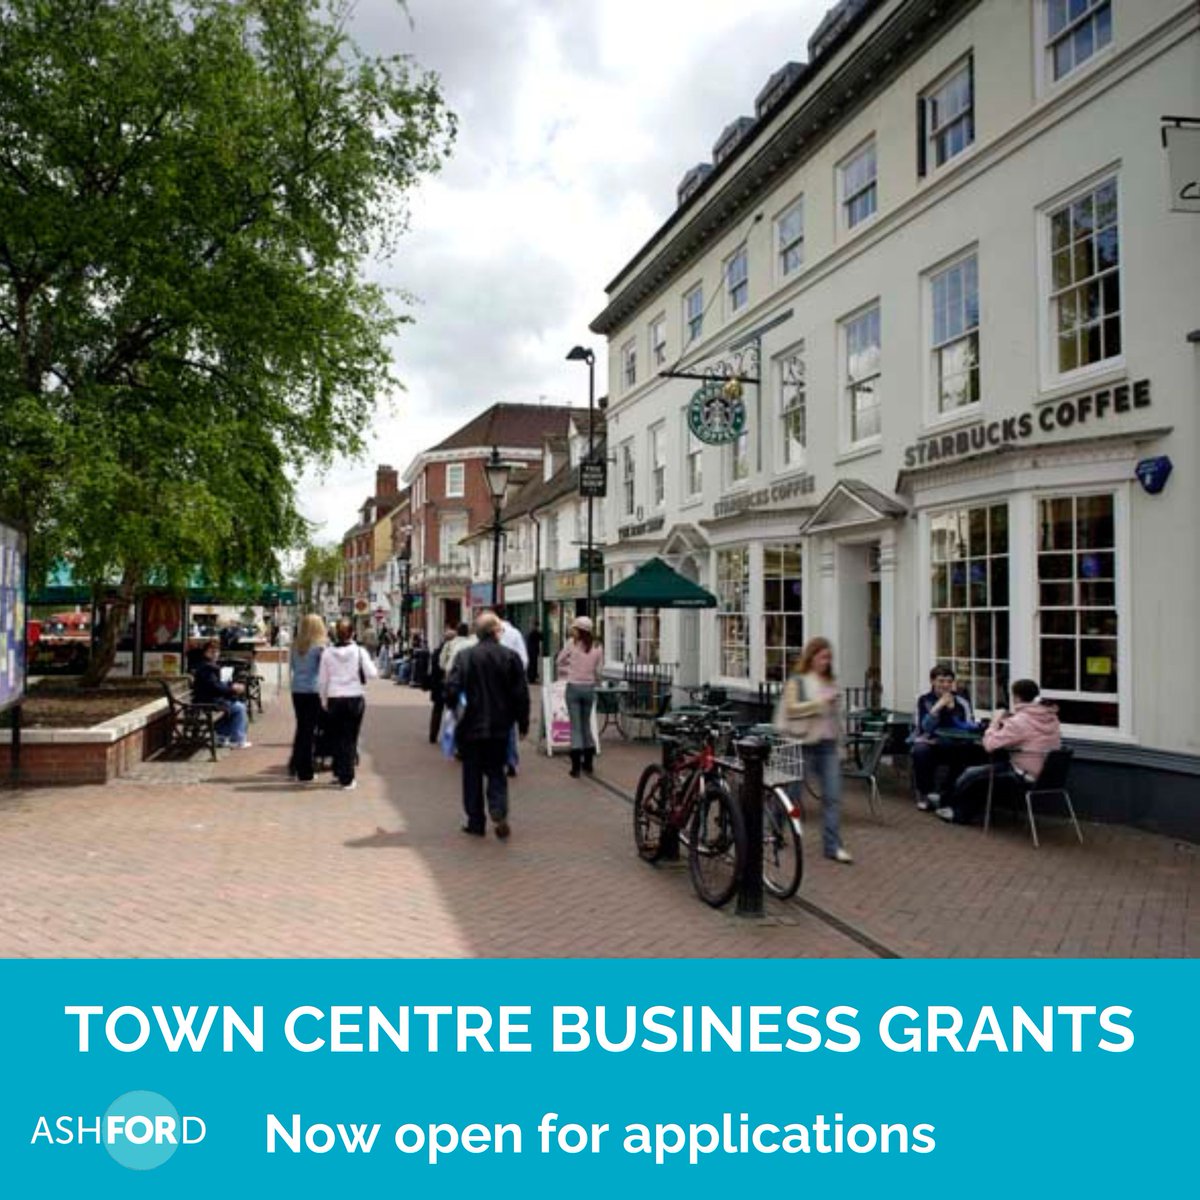 📢 Town Centre Business Grants scheme reopened 📢 Apply for funding support of up to £3000 or £10,000 to bring empty premises back into use and enable improvements to current properties. Apply here: orlo.uk/xHQvN